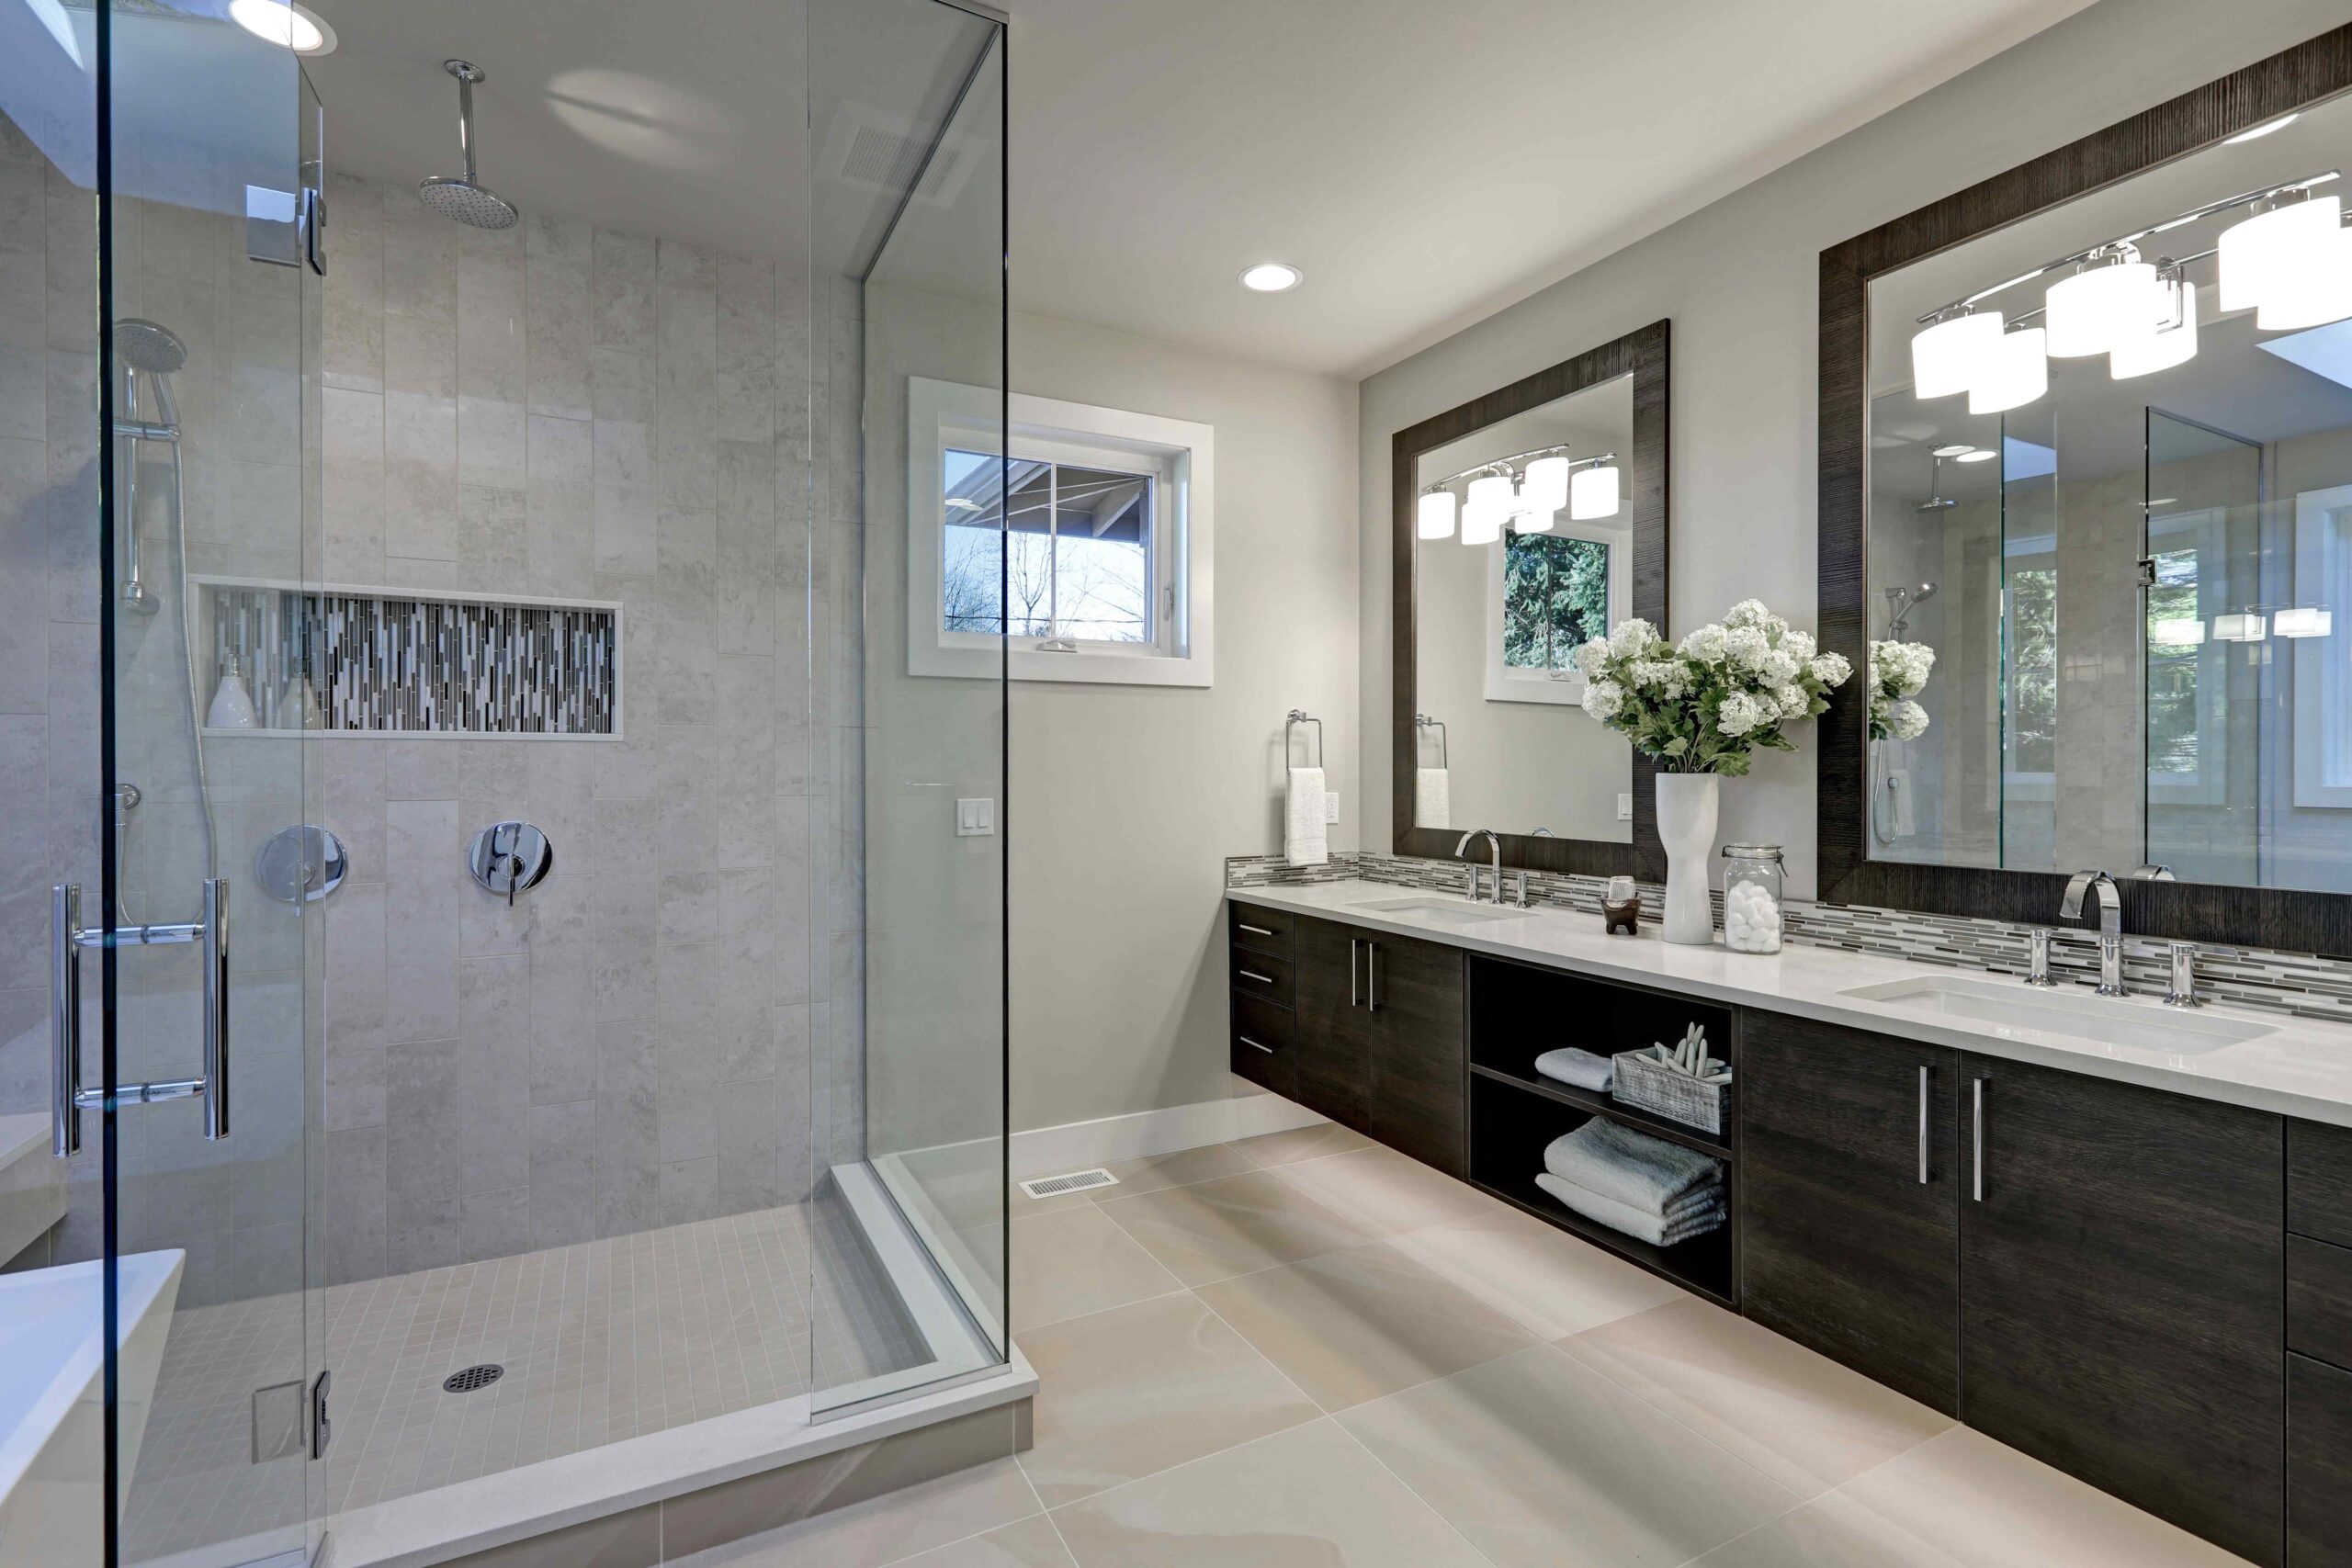 5 Reasons to Invest in a Bathroom Remodel for Your San Diego Home